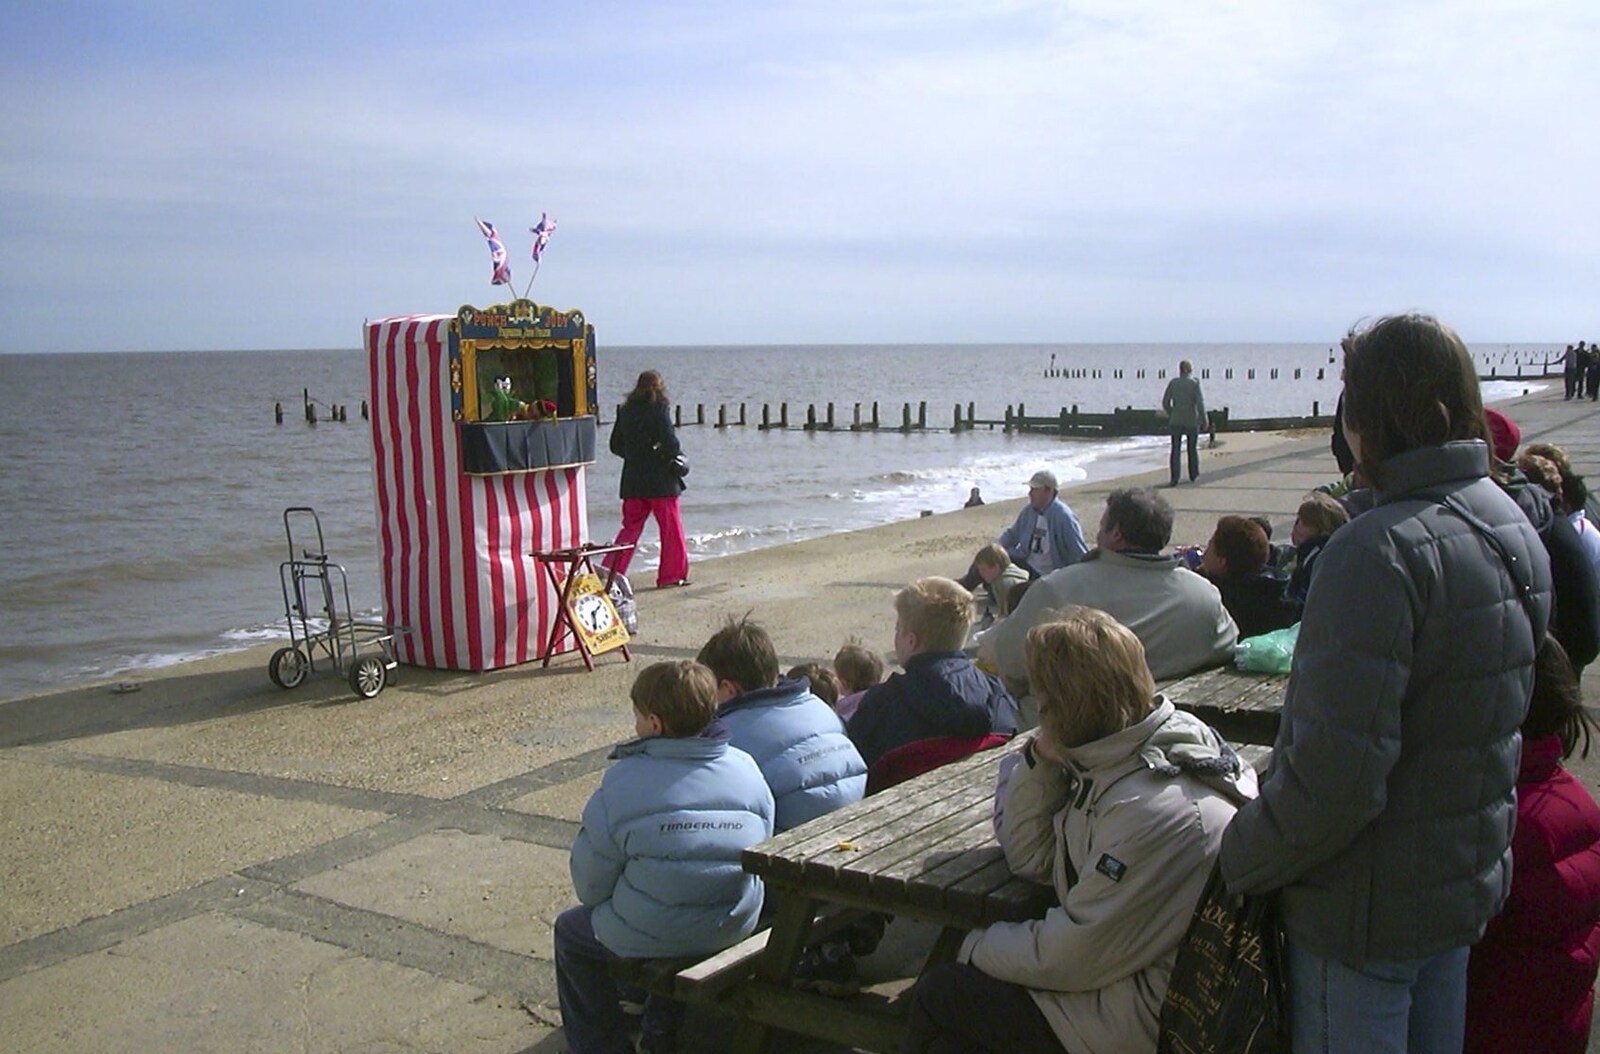 There's Punch and Judy on the beach from A Trip to Sunny Southwold, Suffolk - 12th April